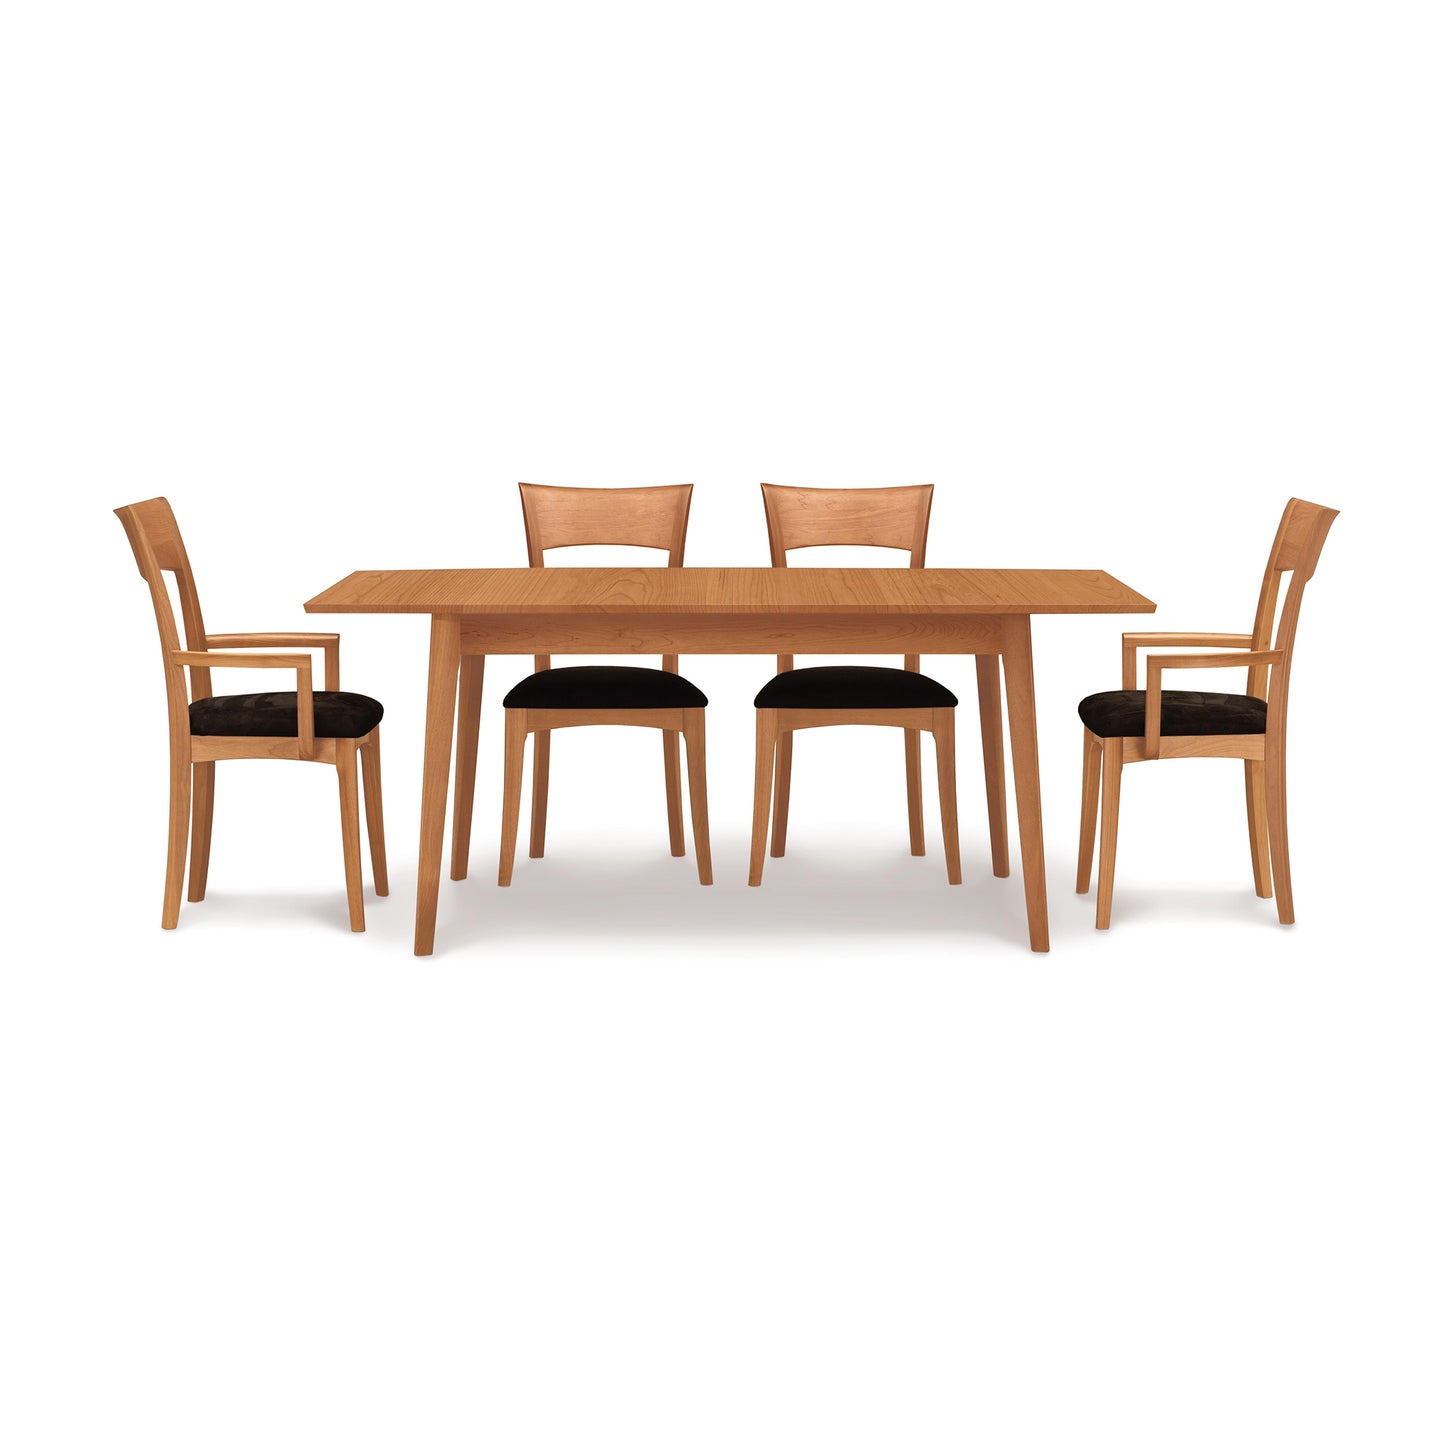 A Catalina Extension Table from Copeland Furniture, with four chairs, perfect for gatherings and meals.